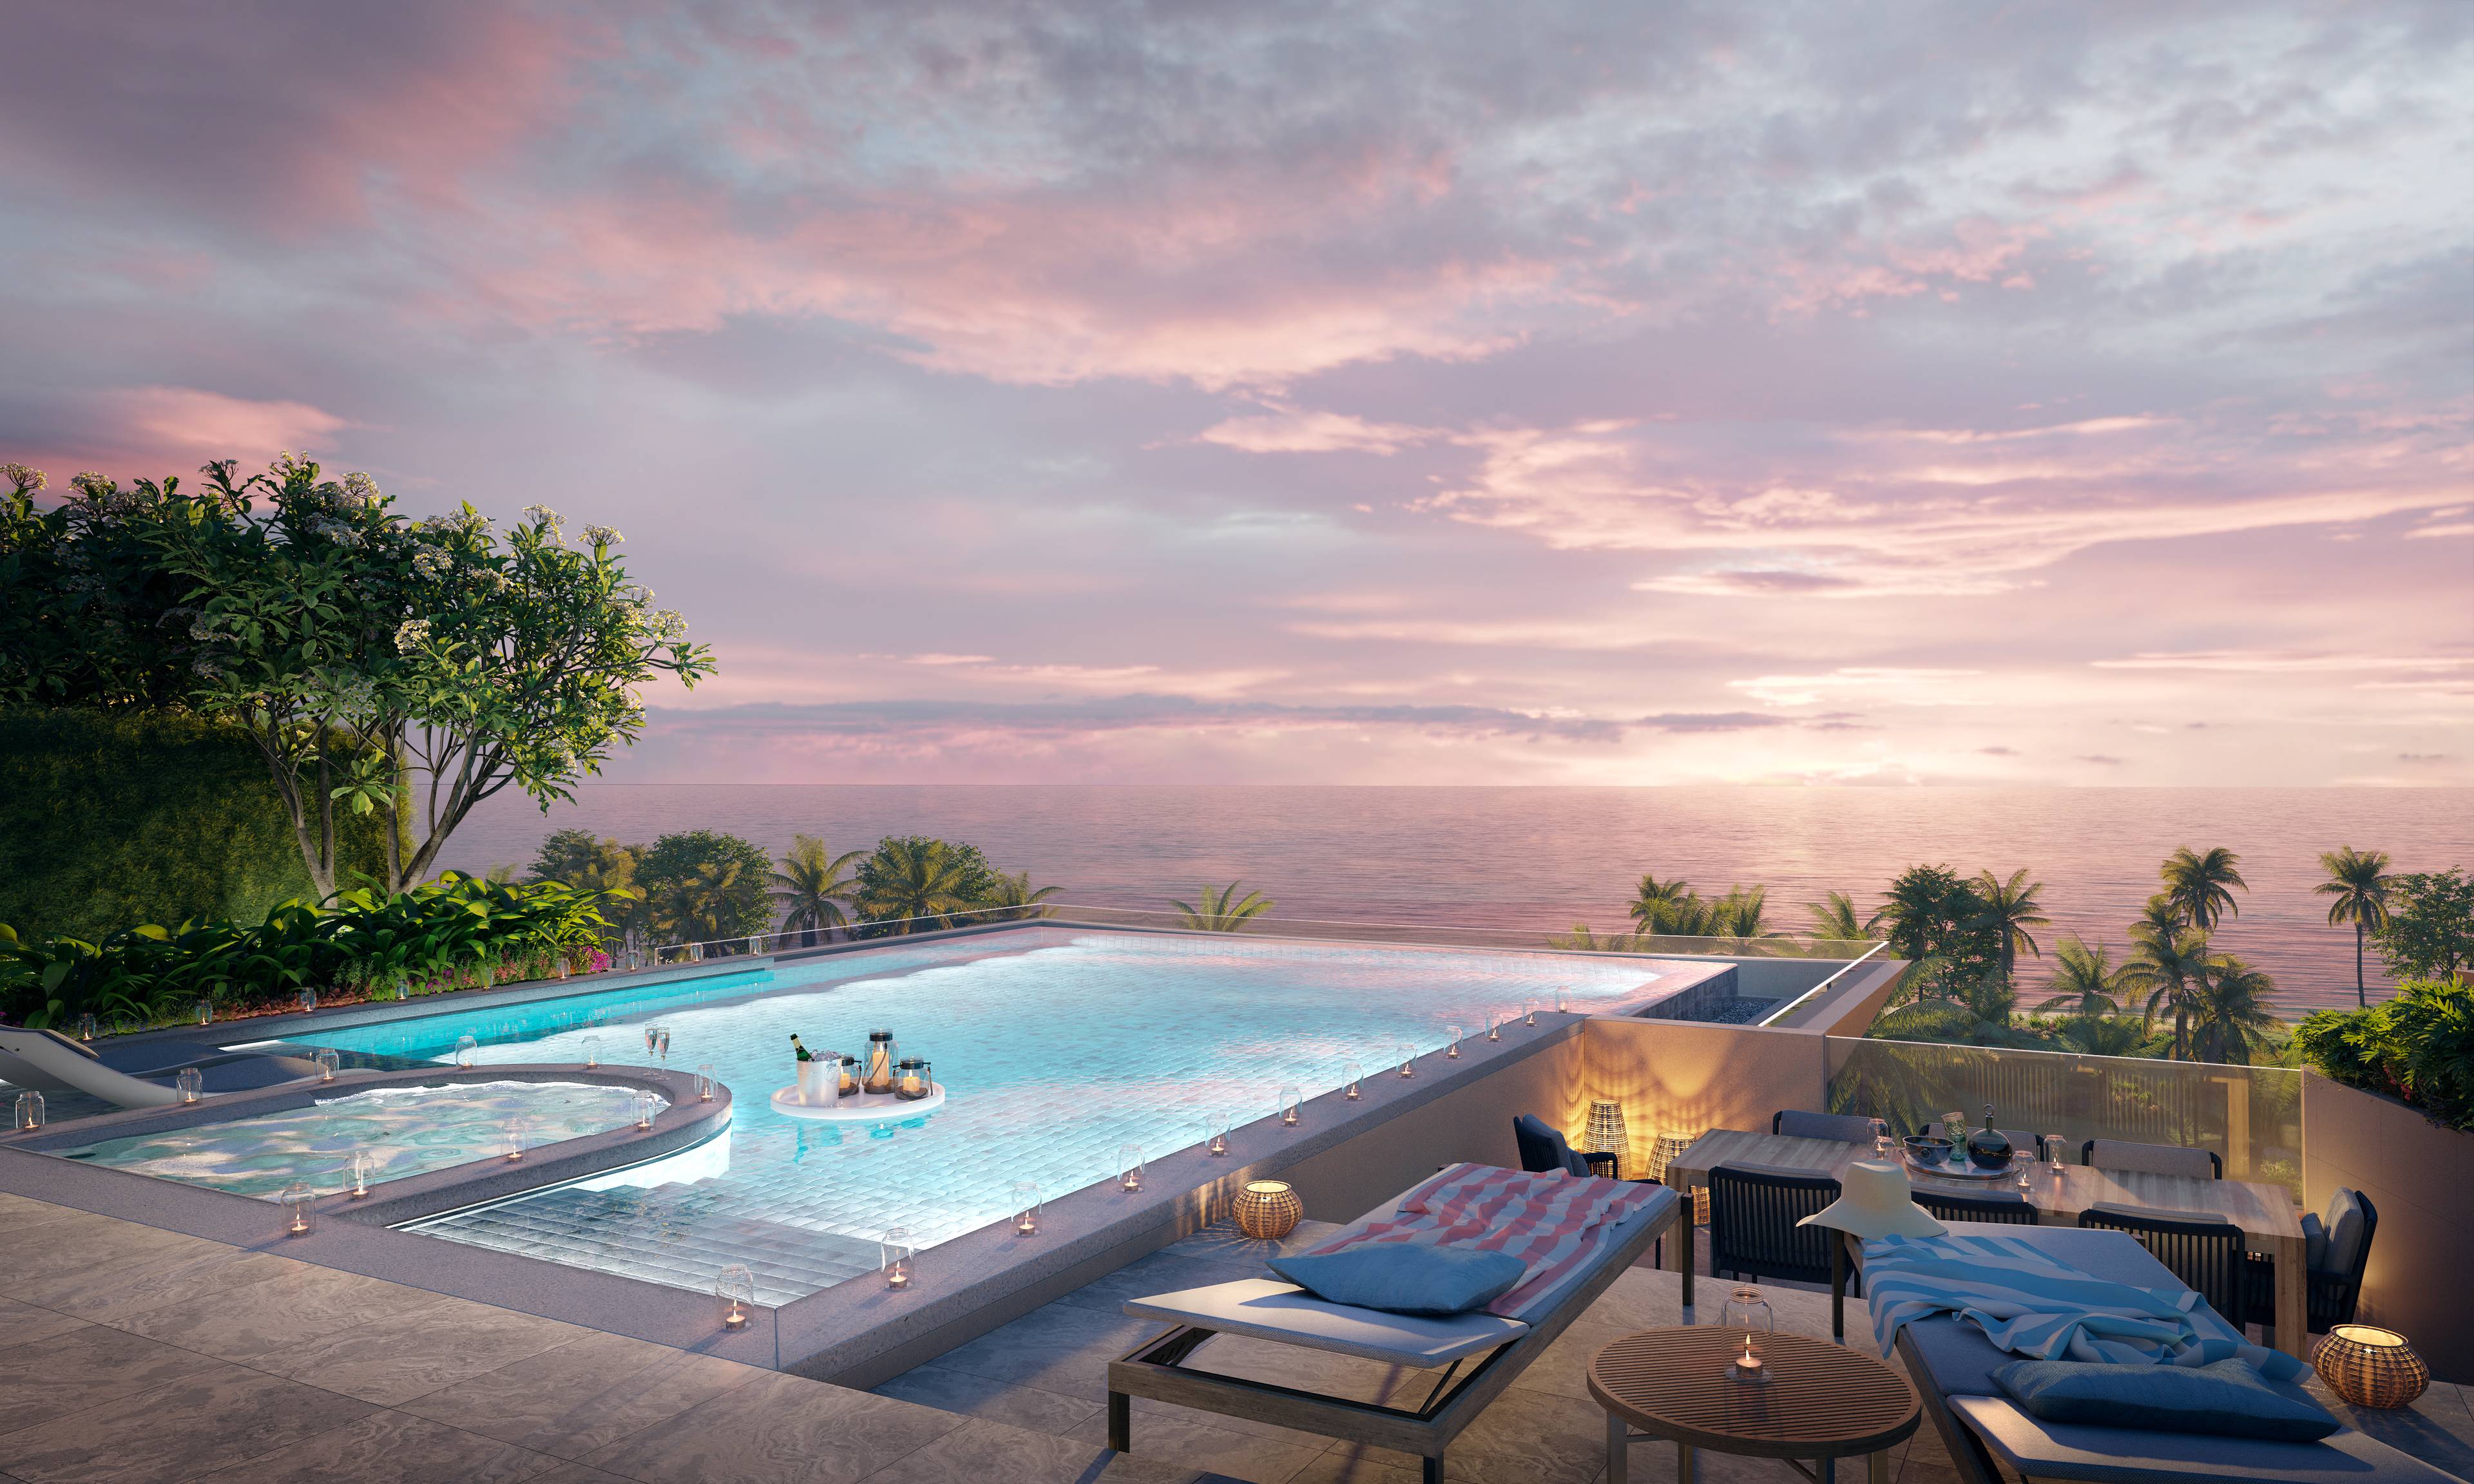 BANYAN TREE SEAVIEW PENTHOUSE WITH PRIVATE POOL IN PHUKET